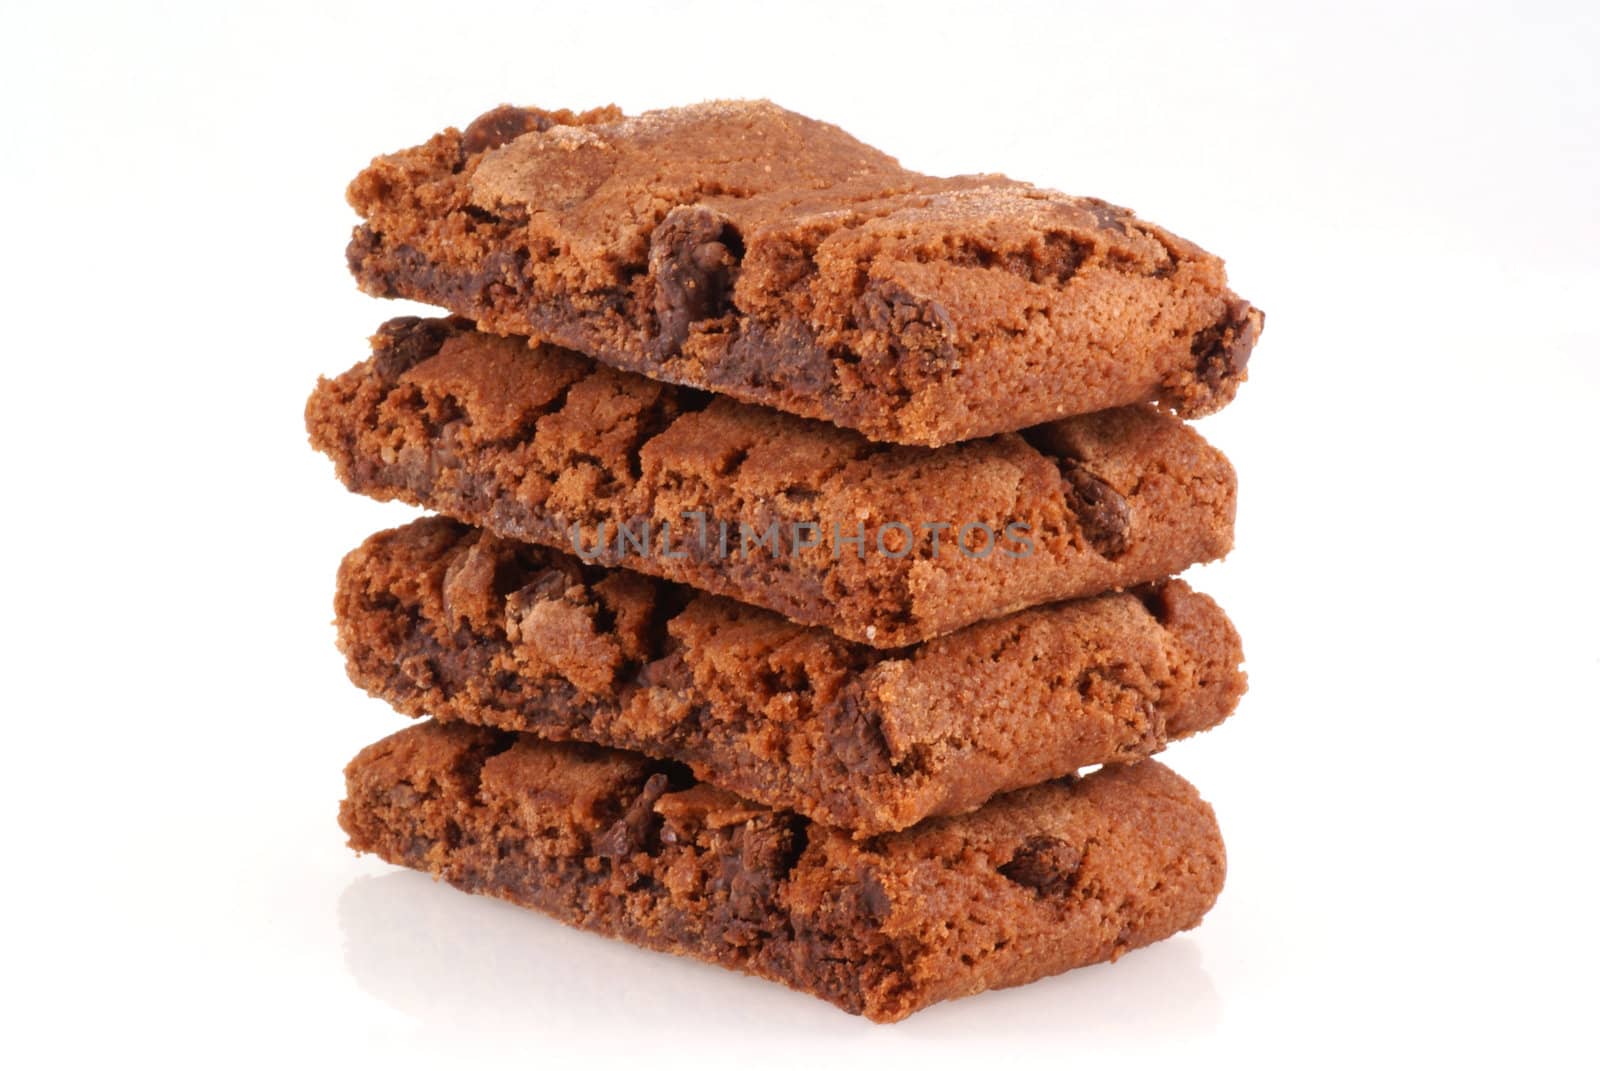 Pile of chocolate brownie cookies on a white background.